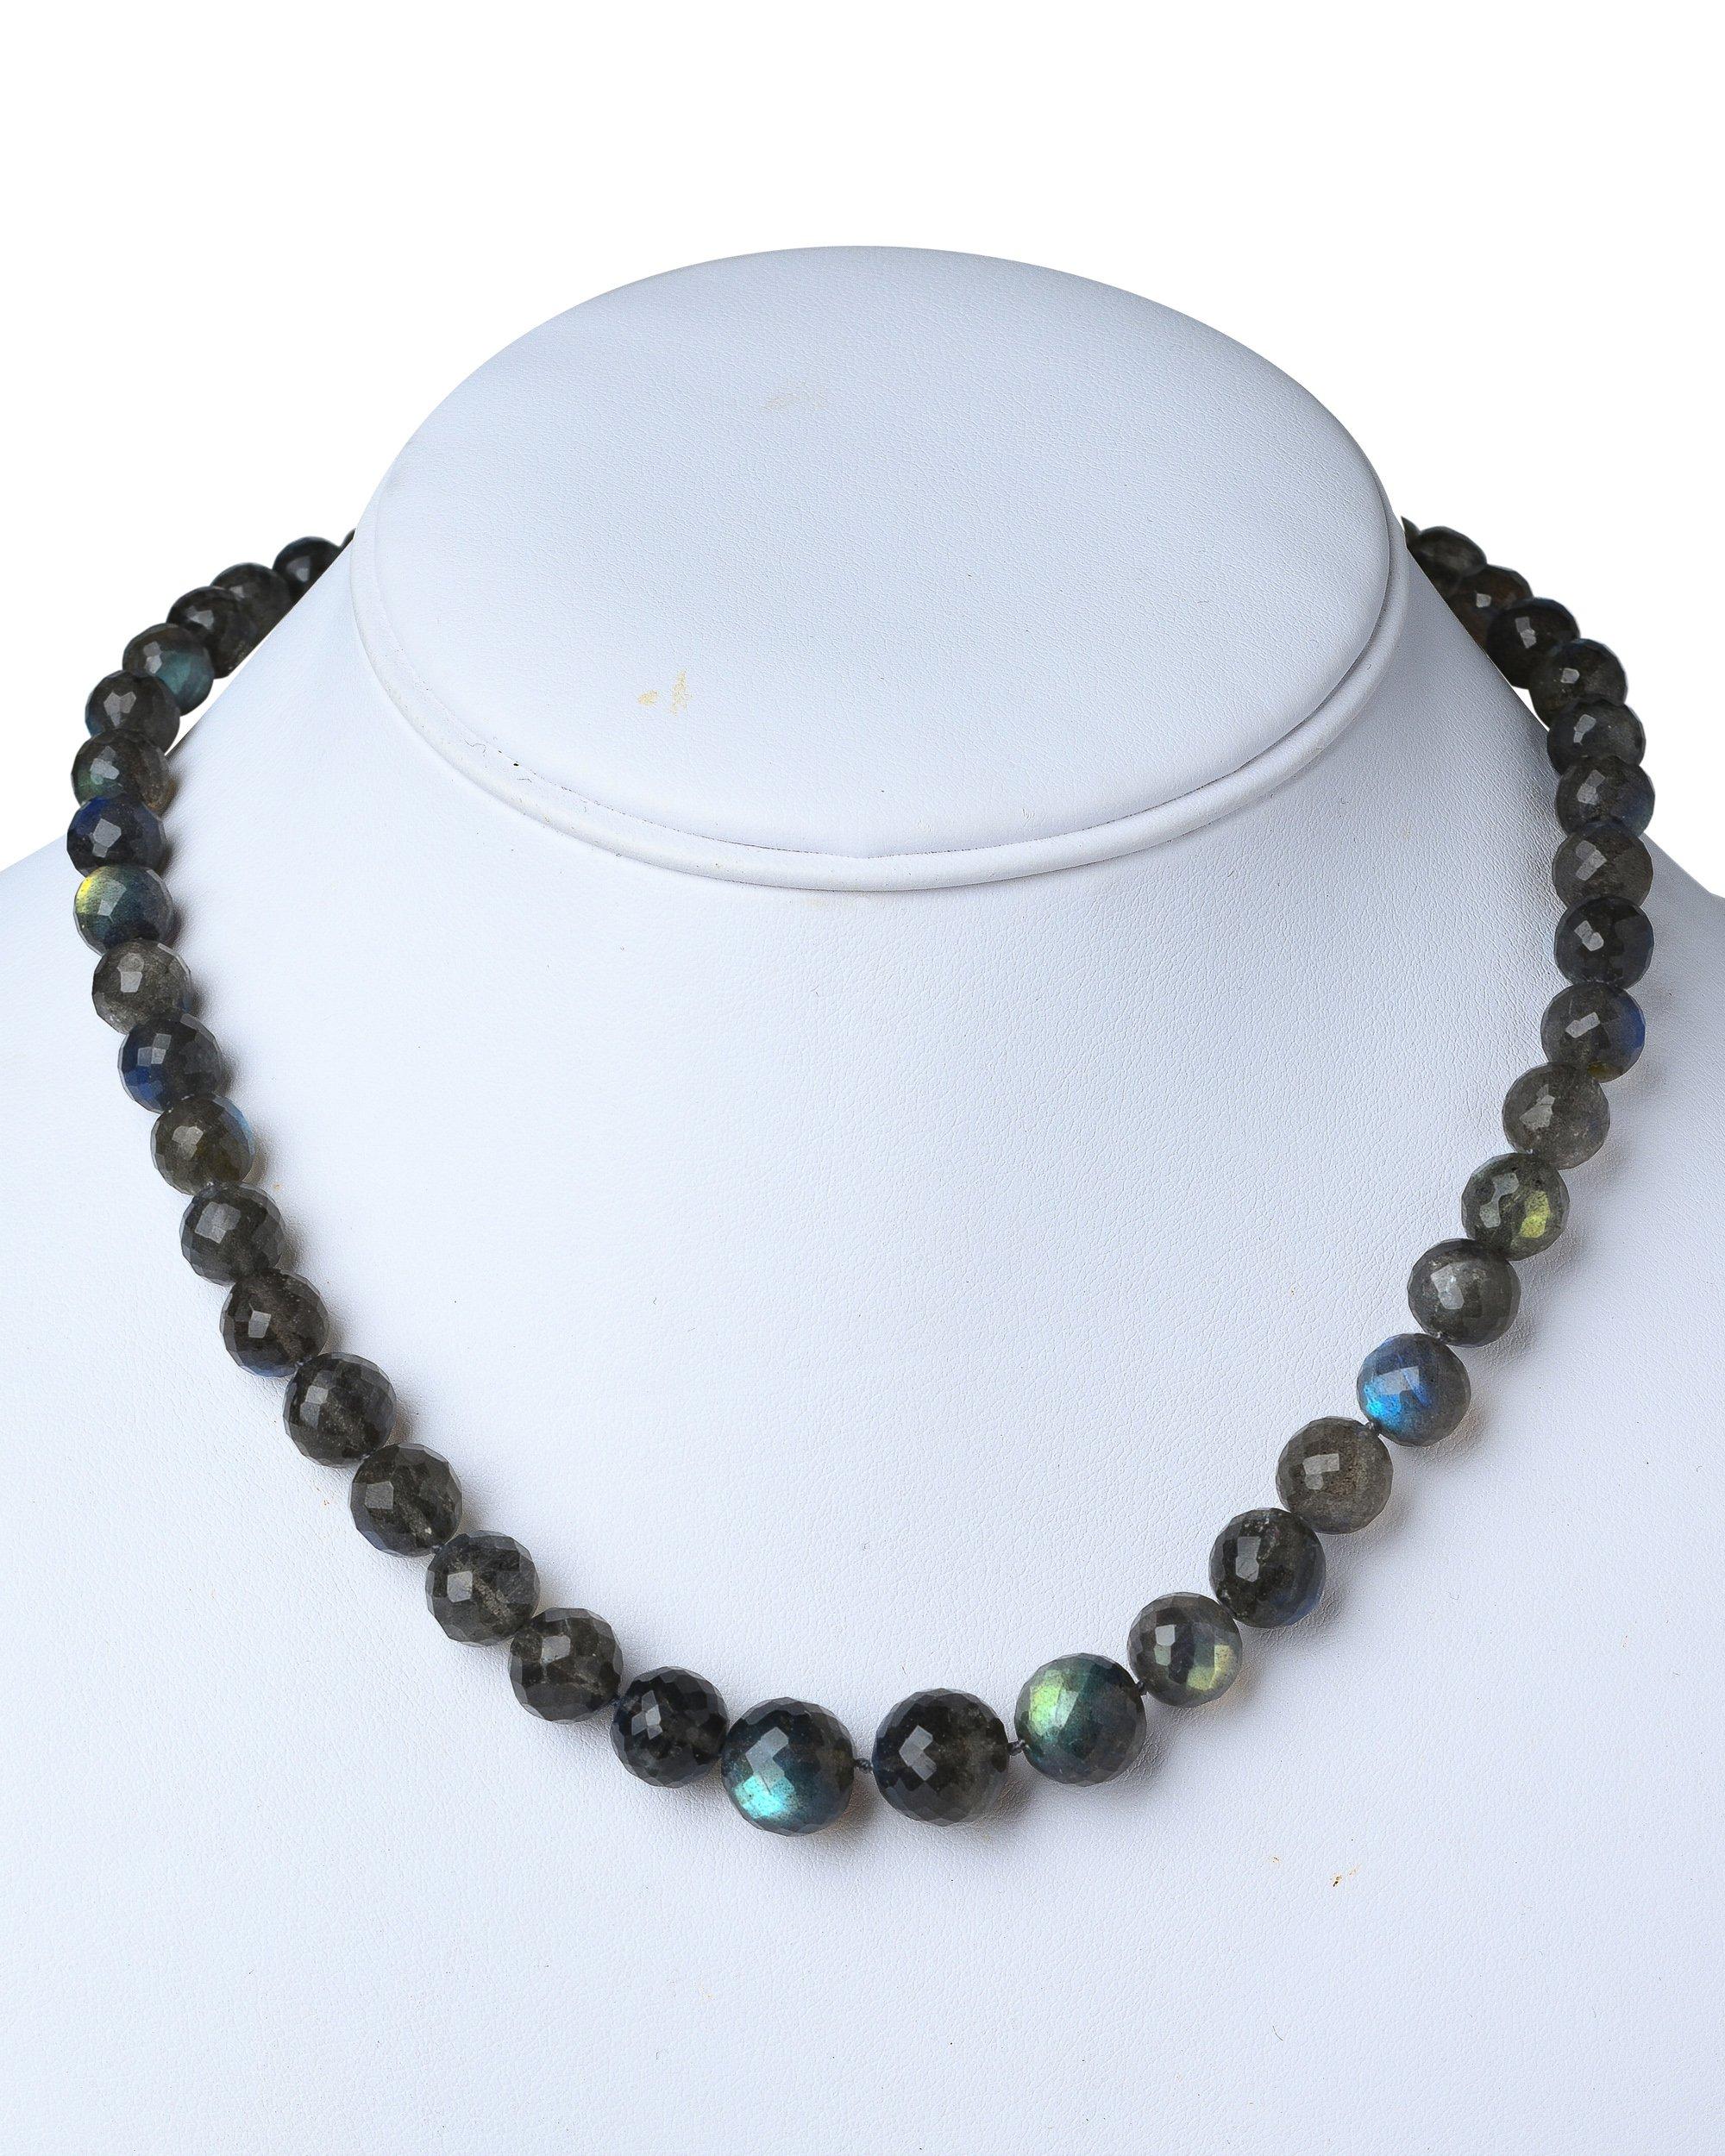 Round graduating faceted labradorite beads strung with Gabrielle's classic 18 karat cone hook and eye shimmers with flashes of blue. Wear this subtle elegant everyday into evening necklace.